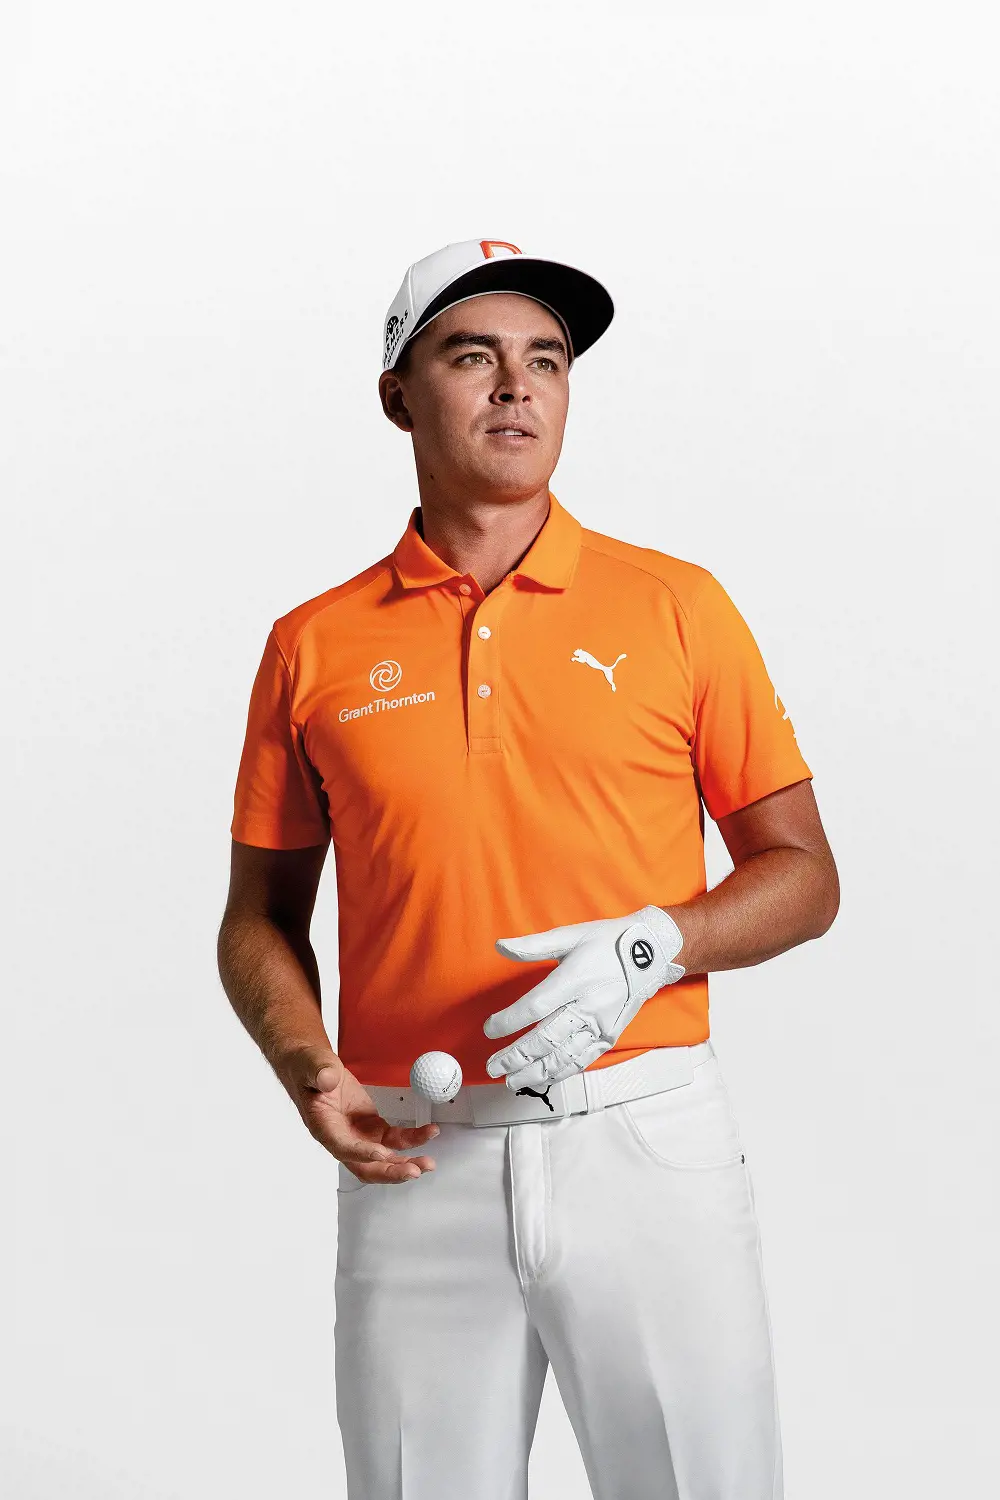 Rickie's last PGA Tour was back in 2019 when he won the Waste Management Phoenix Open